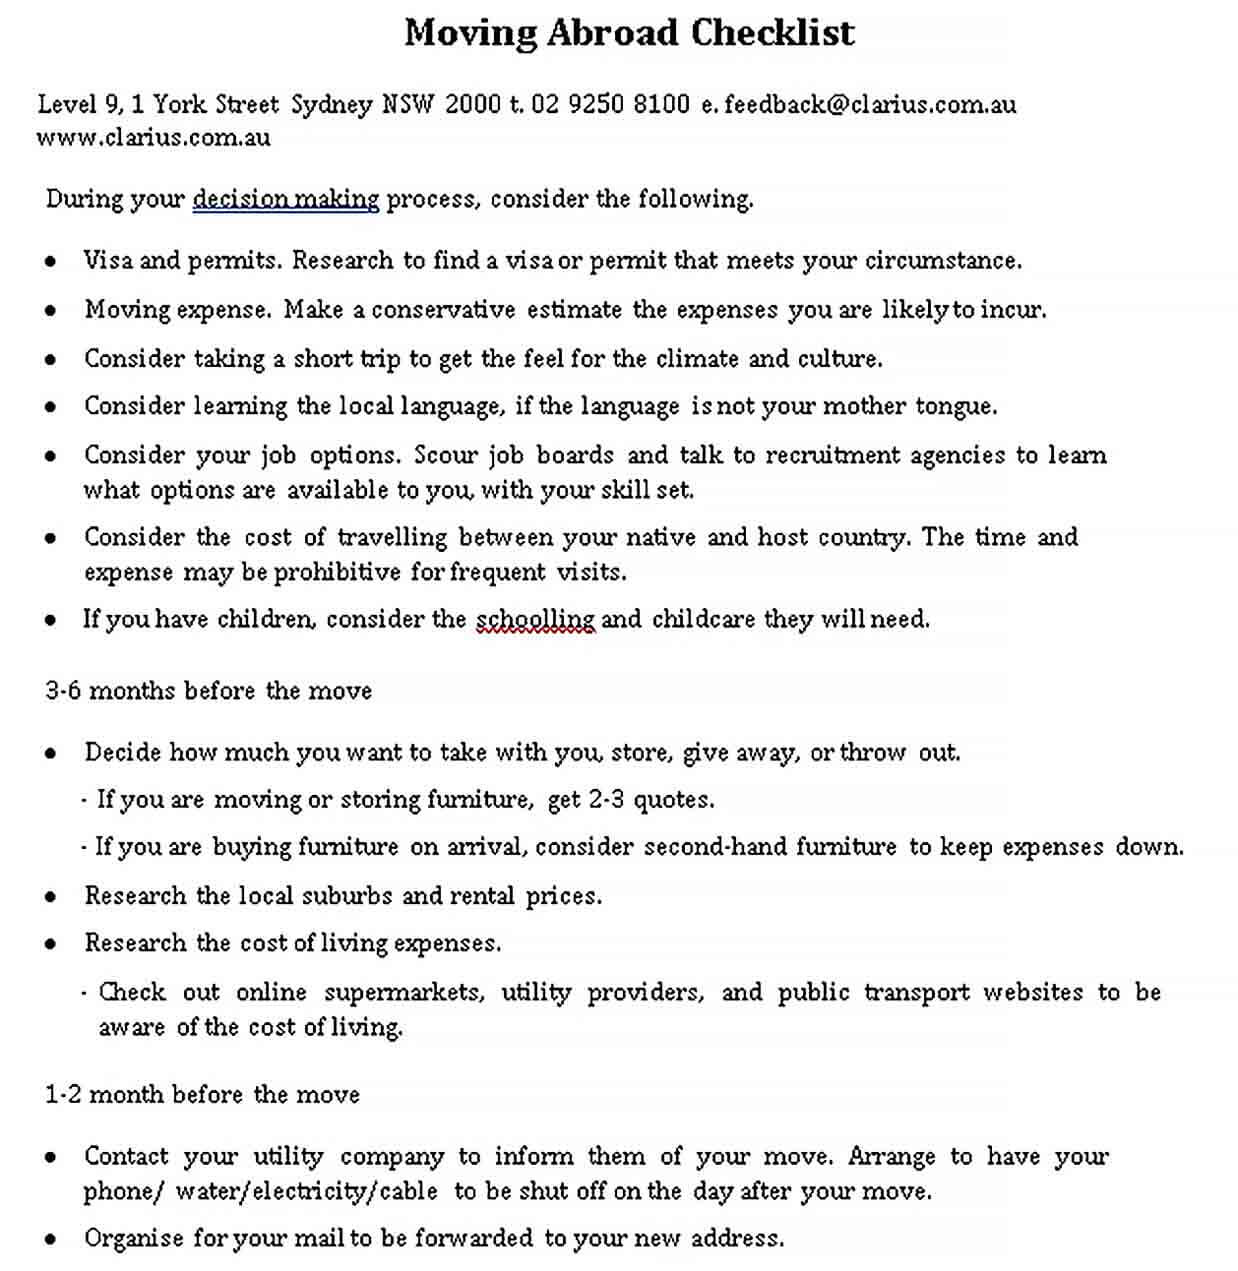 Sample Moving Abroad Checklist Template